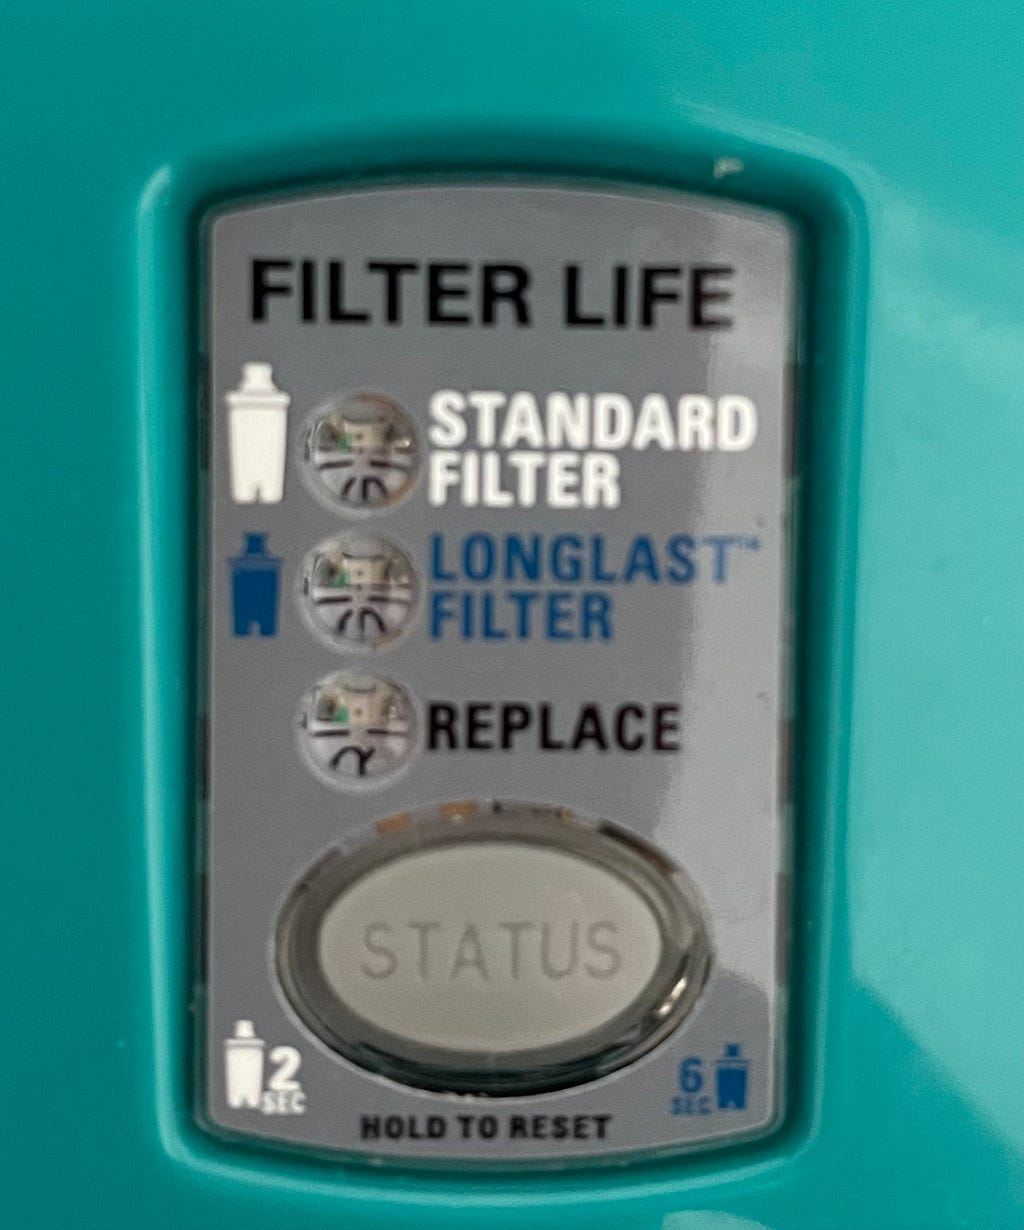 The filter replacement indicator on a Brita water filter. Labels read “Standard Filter”, “Longlast Filter” and “Replace”.